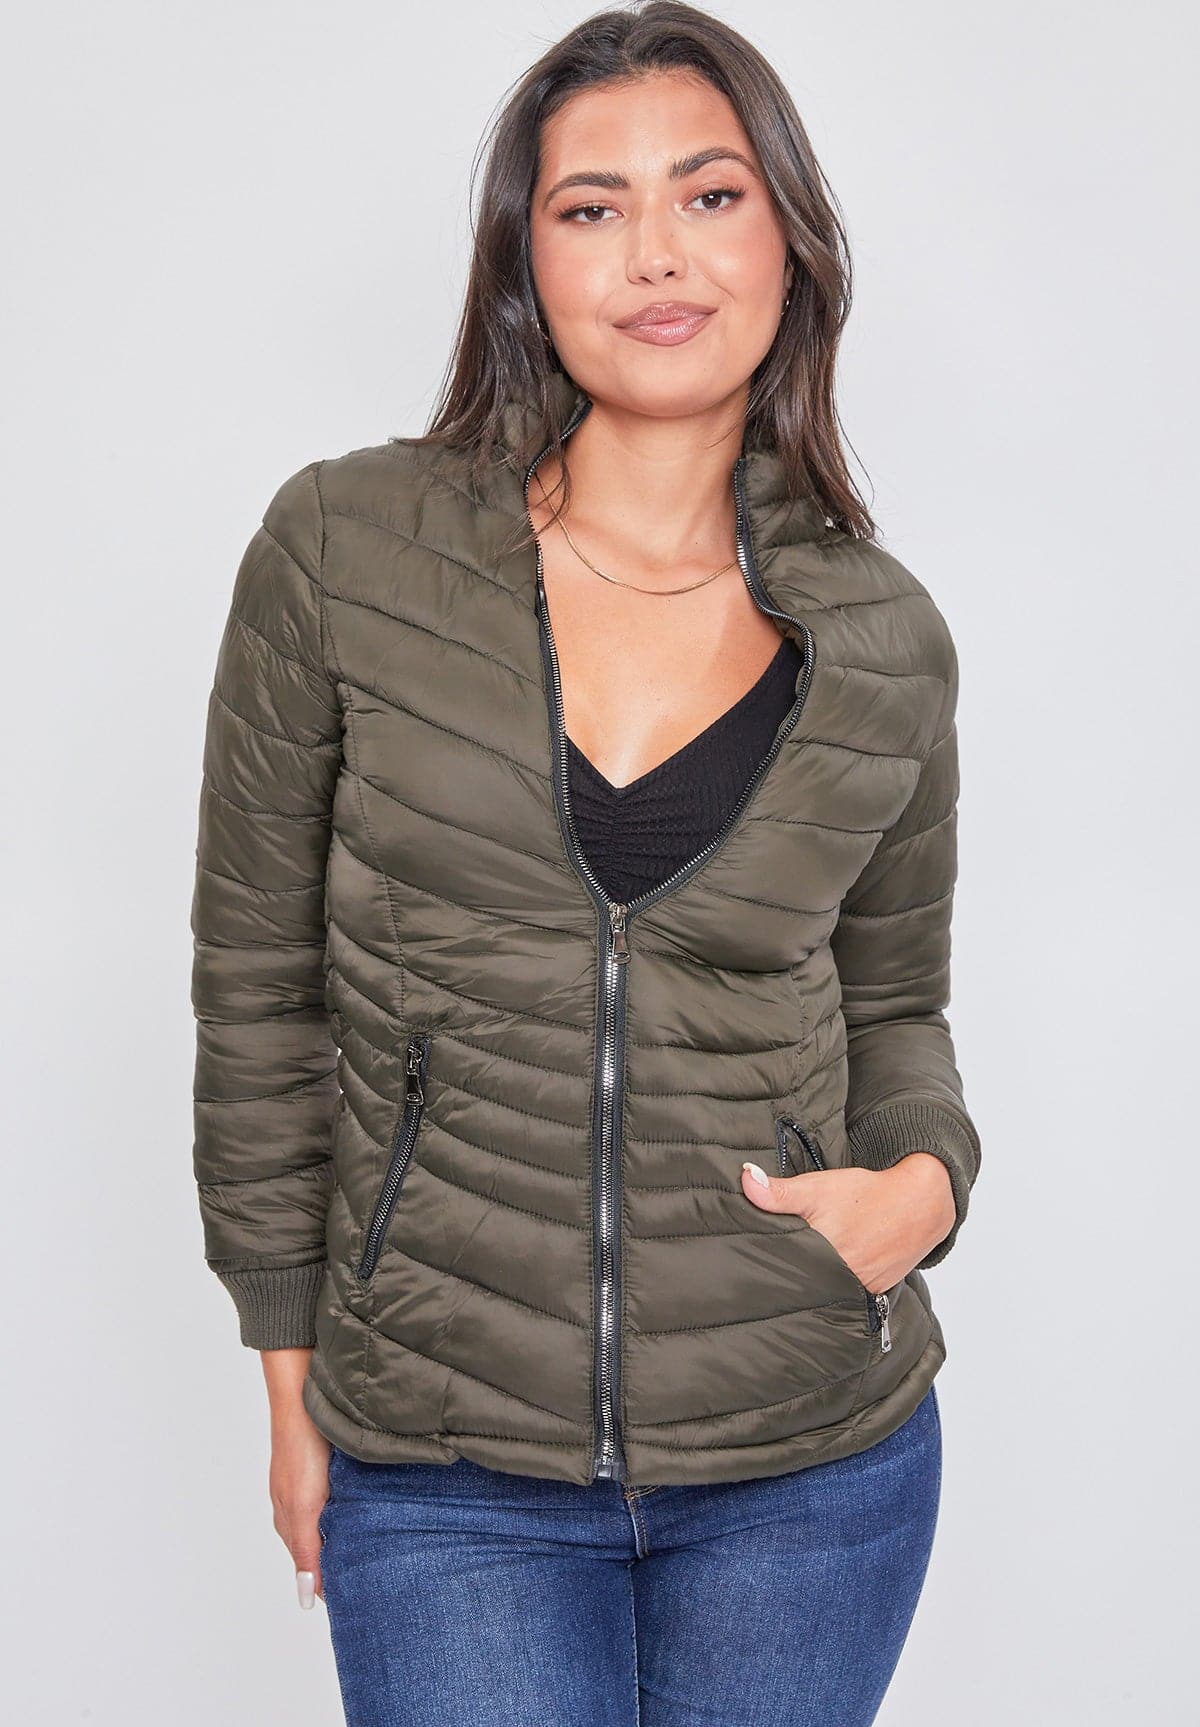 Women's Puffer Lined Shell Jacket with Fur Hood Deal